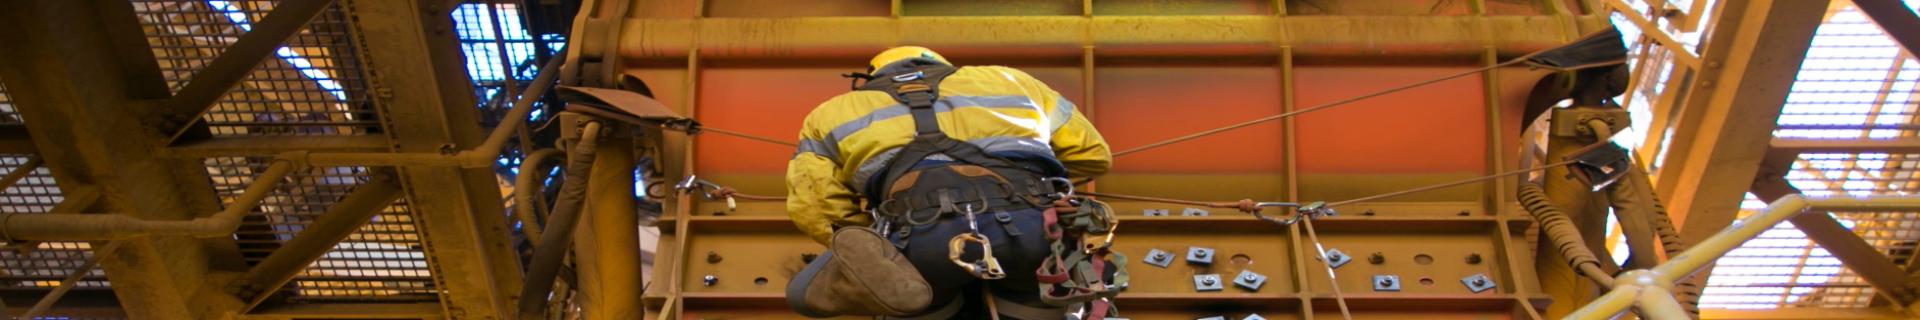 Fall Protection in Industrial and Construction Environments